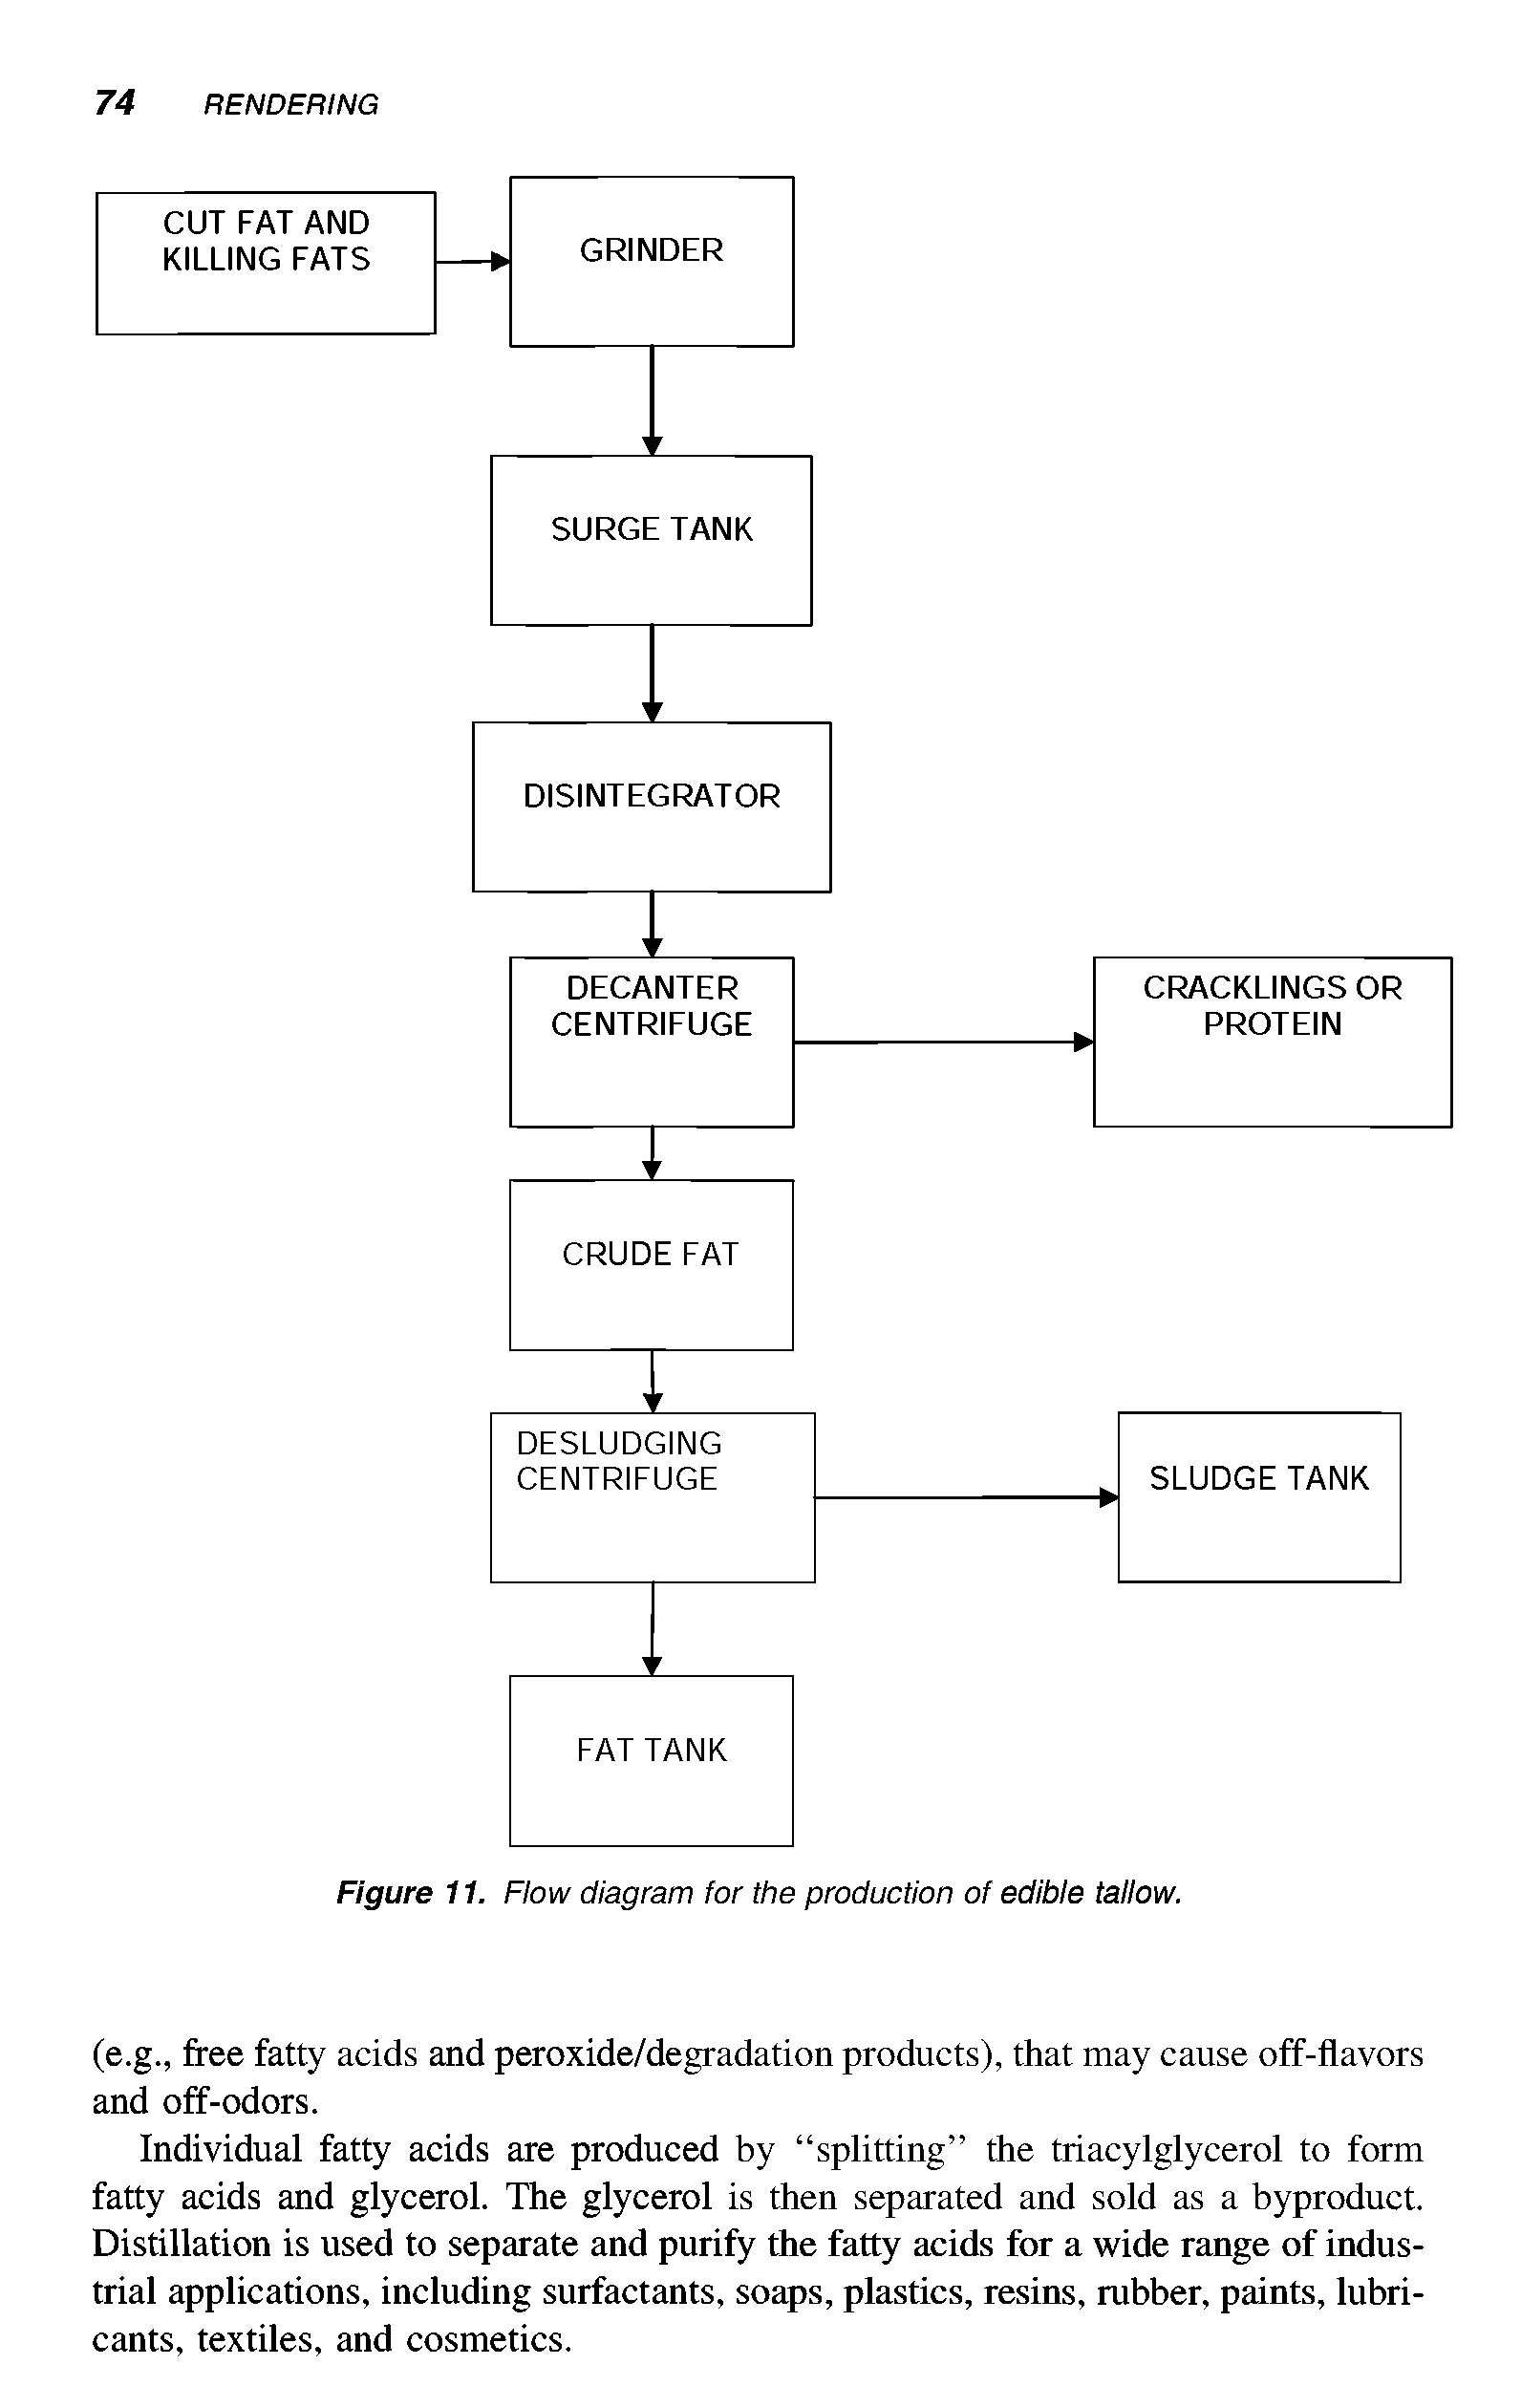 Figure 11. Flow diagram for the production of edible tallow.